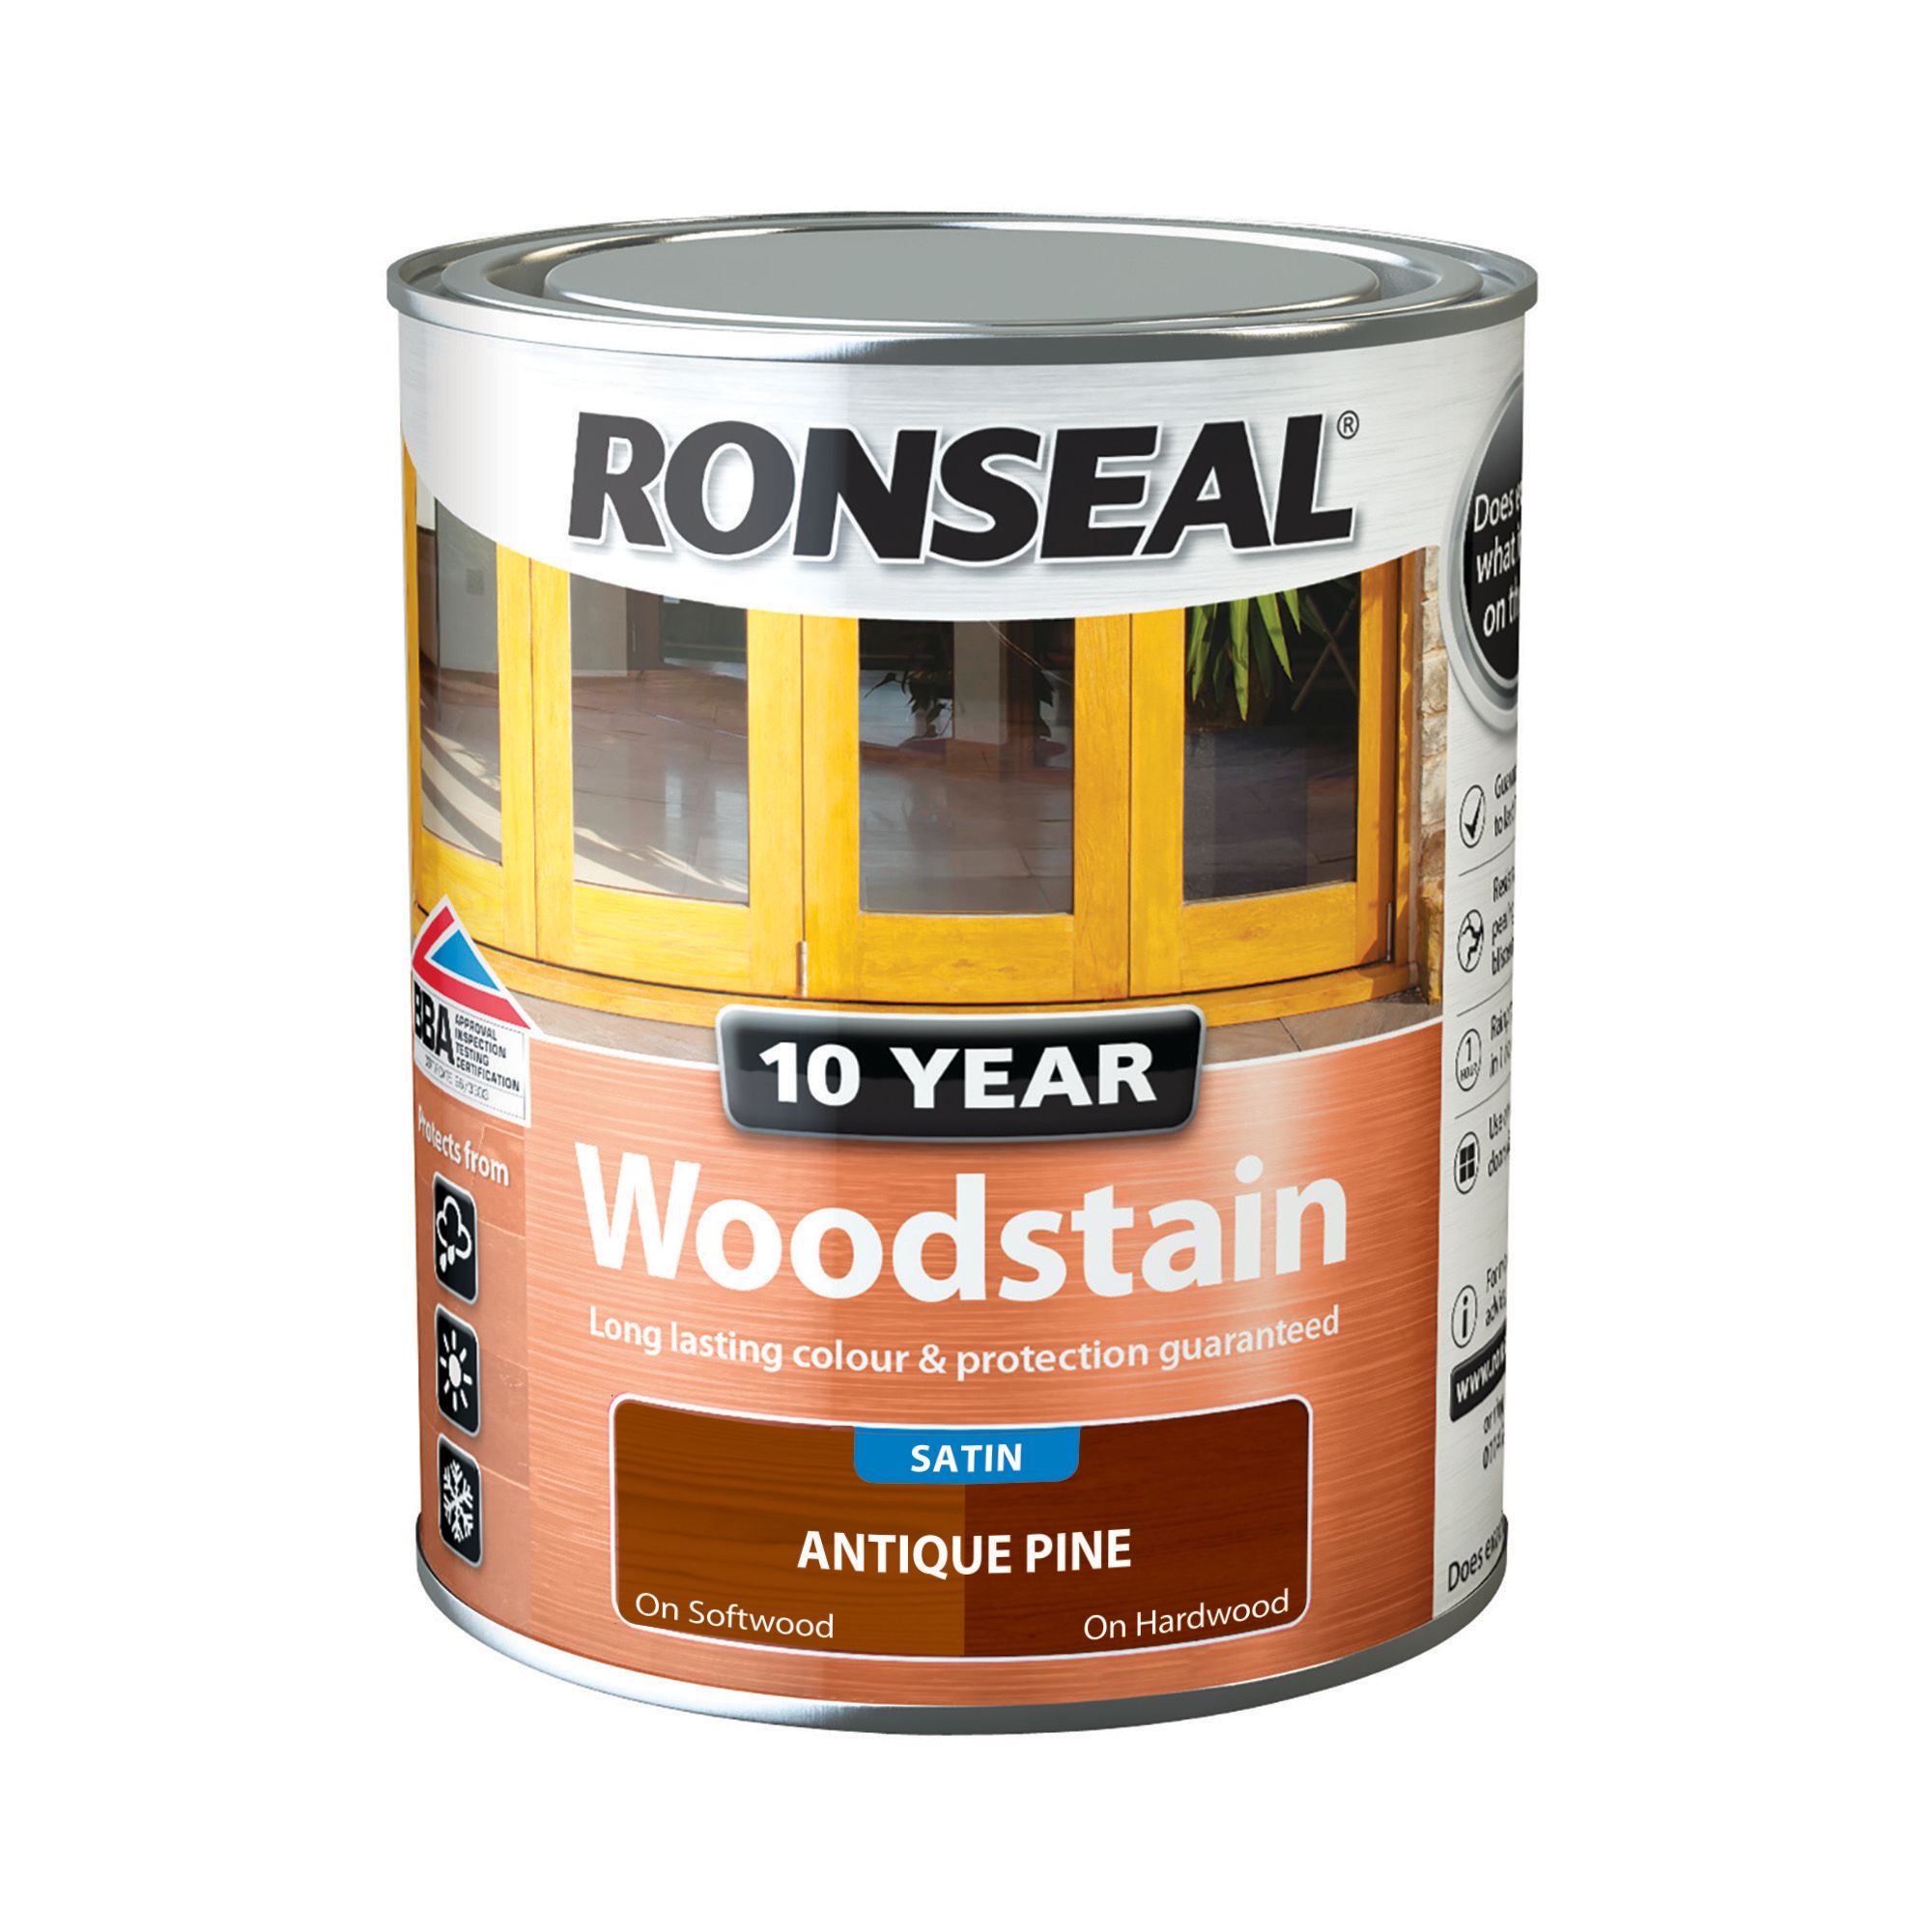 Image of Ronseal 10 Year Woodstain - Antique Pine 750ml